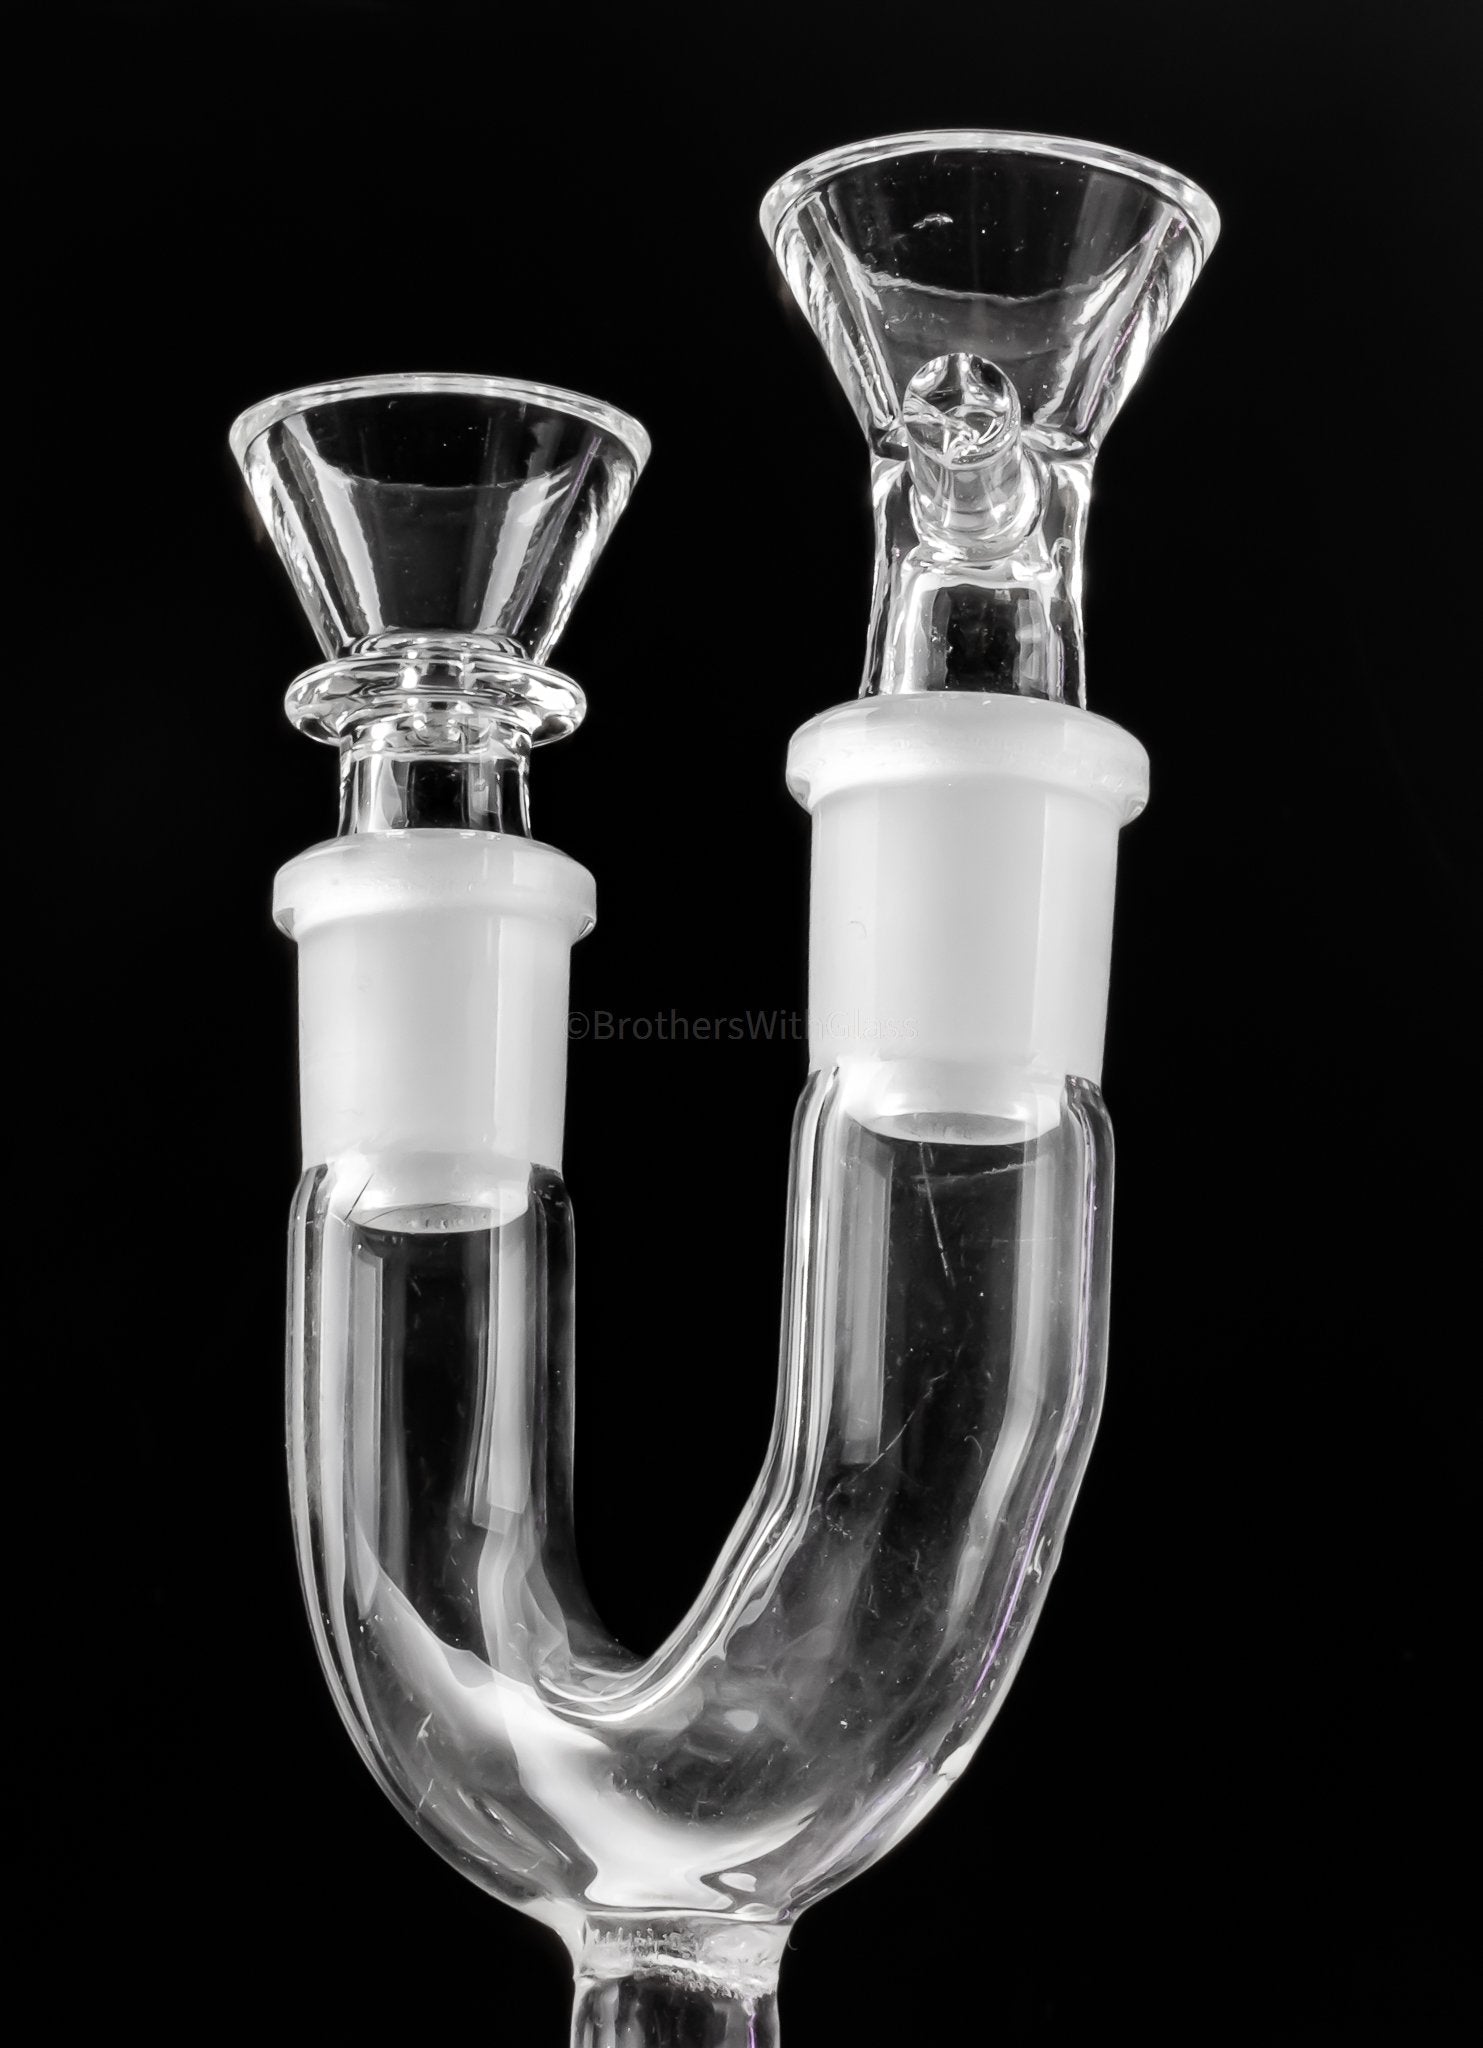 Buy Dual Pipe Extension for Hookah - Connector for Two Pipes